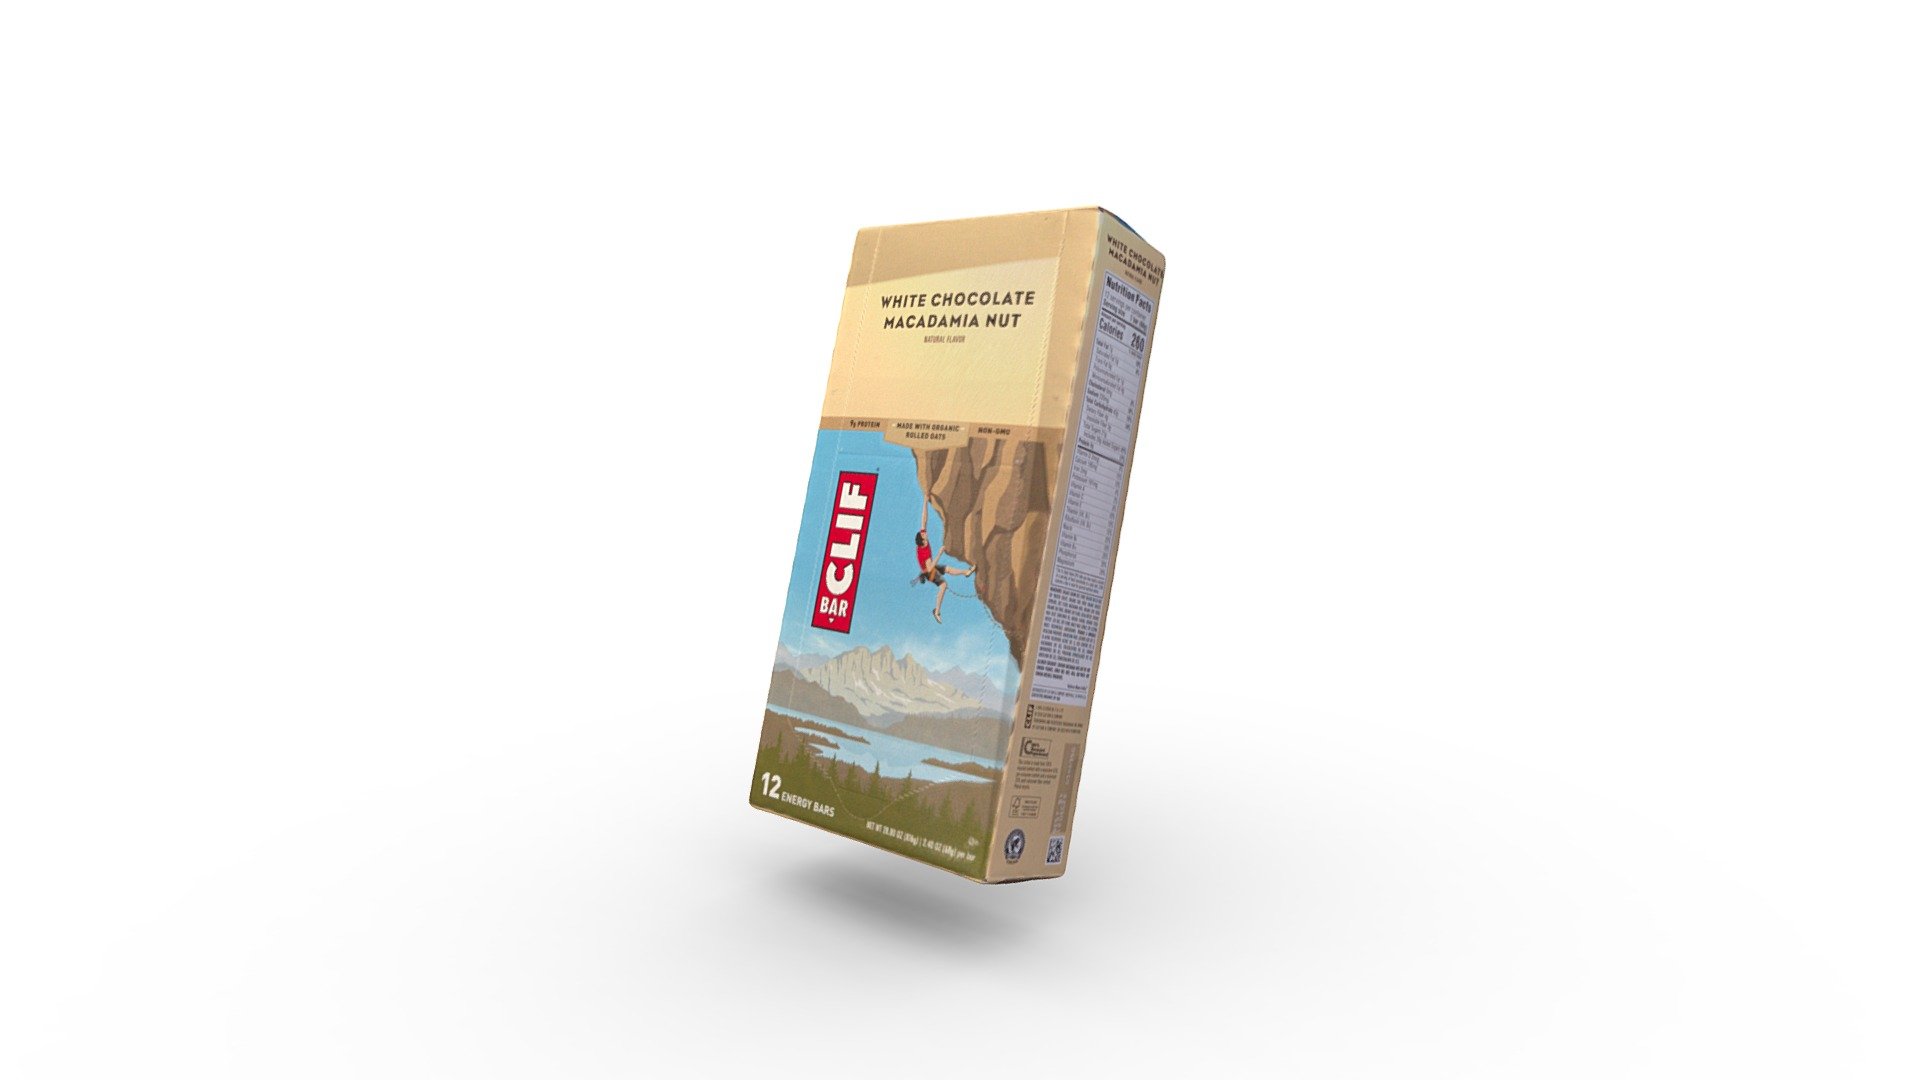 3D Scan of a 12 Pack of White Chocolate Macadamia Nut CLIF BAR

With organic rolled oats, macadamia nuts, and 9 grams of protein, White Chocolate Macadamia Nut Flavor CLIF BAR® is perfect for sustaining your energy wherever adventure takes you 3d model